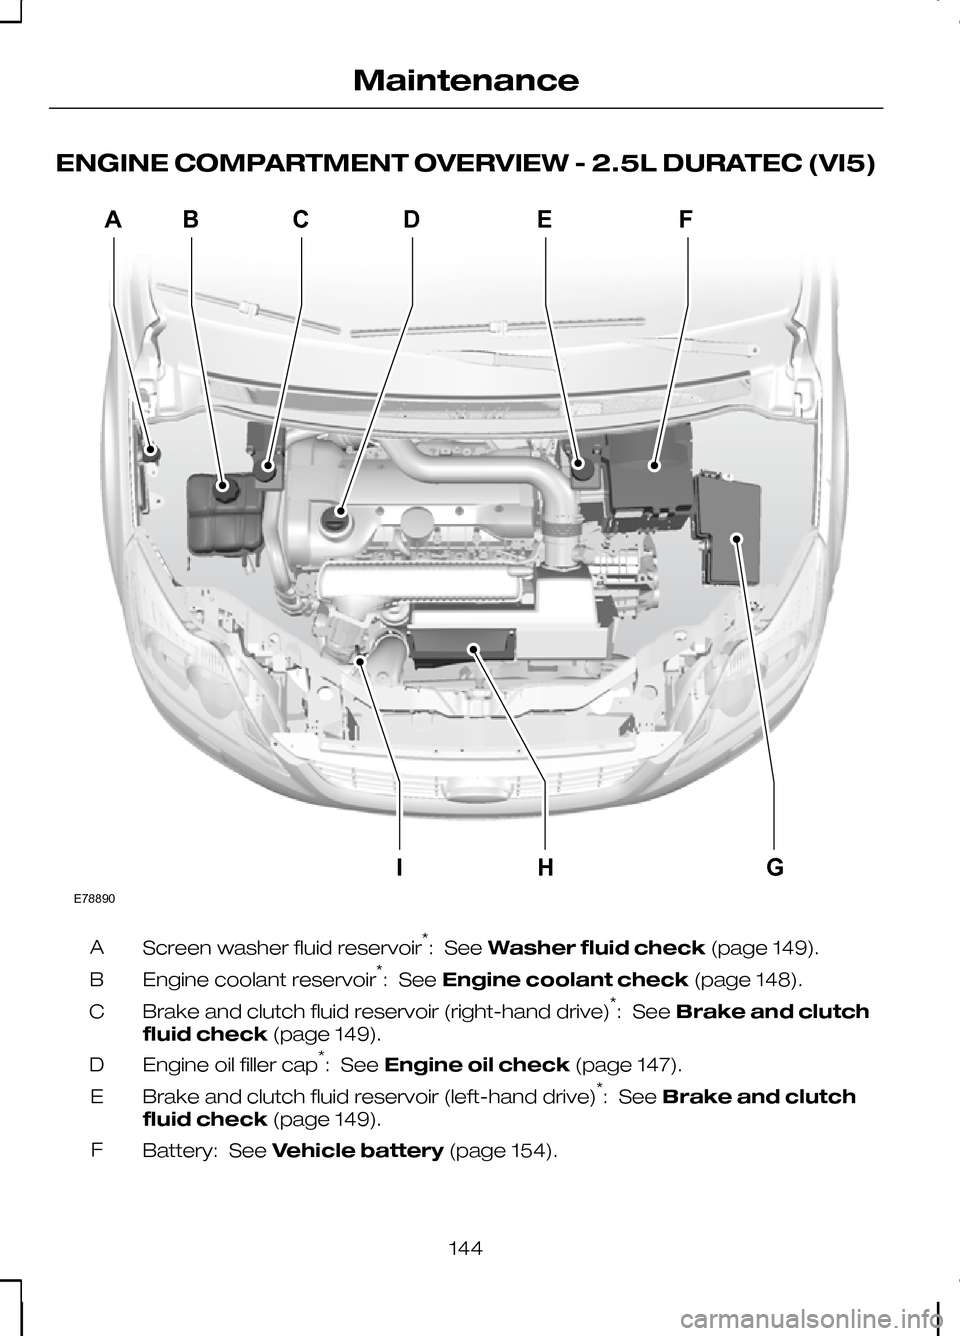 FORD KUGA 2010 1.G Owners Manual ENGINE COMPARTMENT OVERVIEW - 2.5L DURATEC (VI5)
Screen washer fluid reservoir
*
: See Washer fluid check (page 149).
A
Engine coolant reservoir *
: See Engine coolant check (page 148).
B
Brake and cl